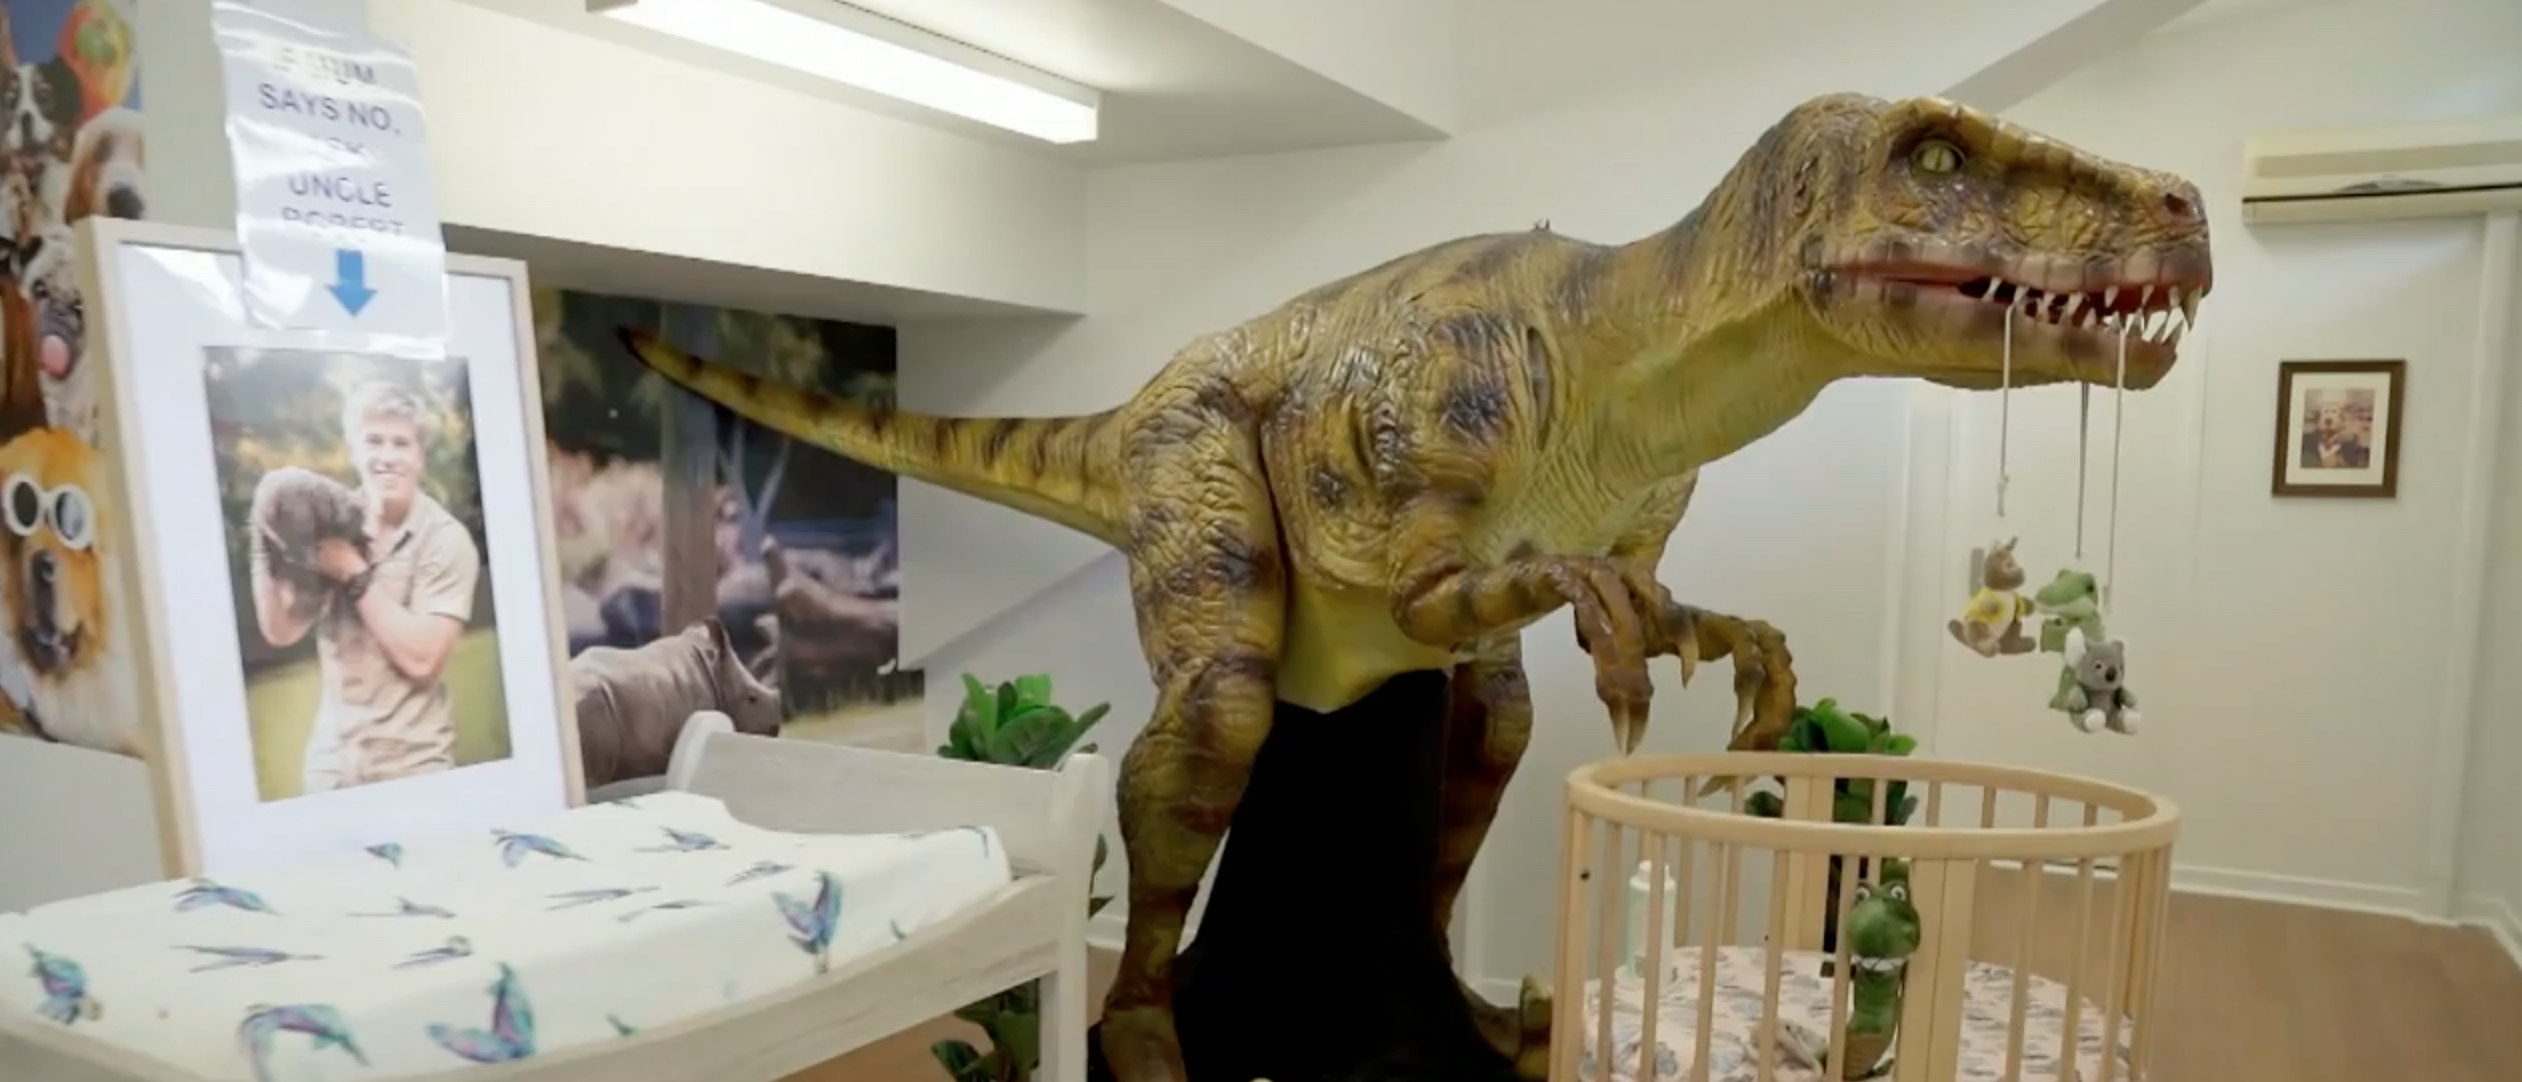 Grace Irwin&#x27;s dinosaur-themed nursery with the T-Rex holding a baby mobile over the crib